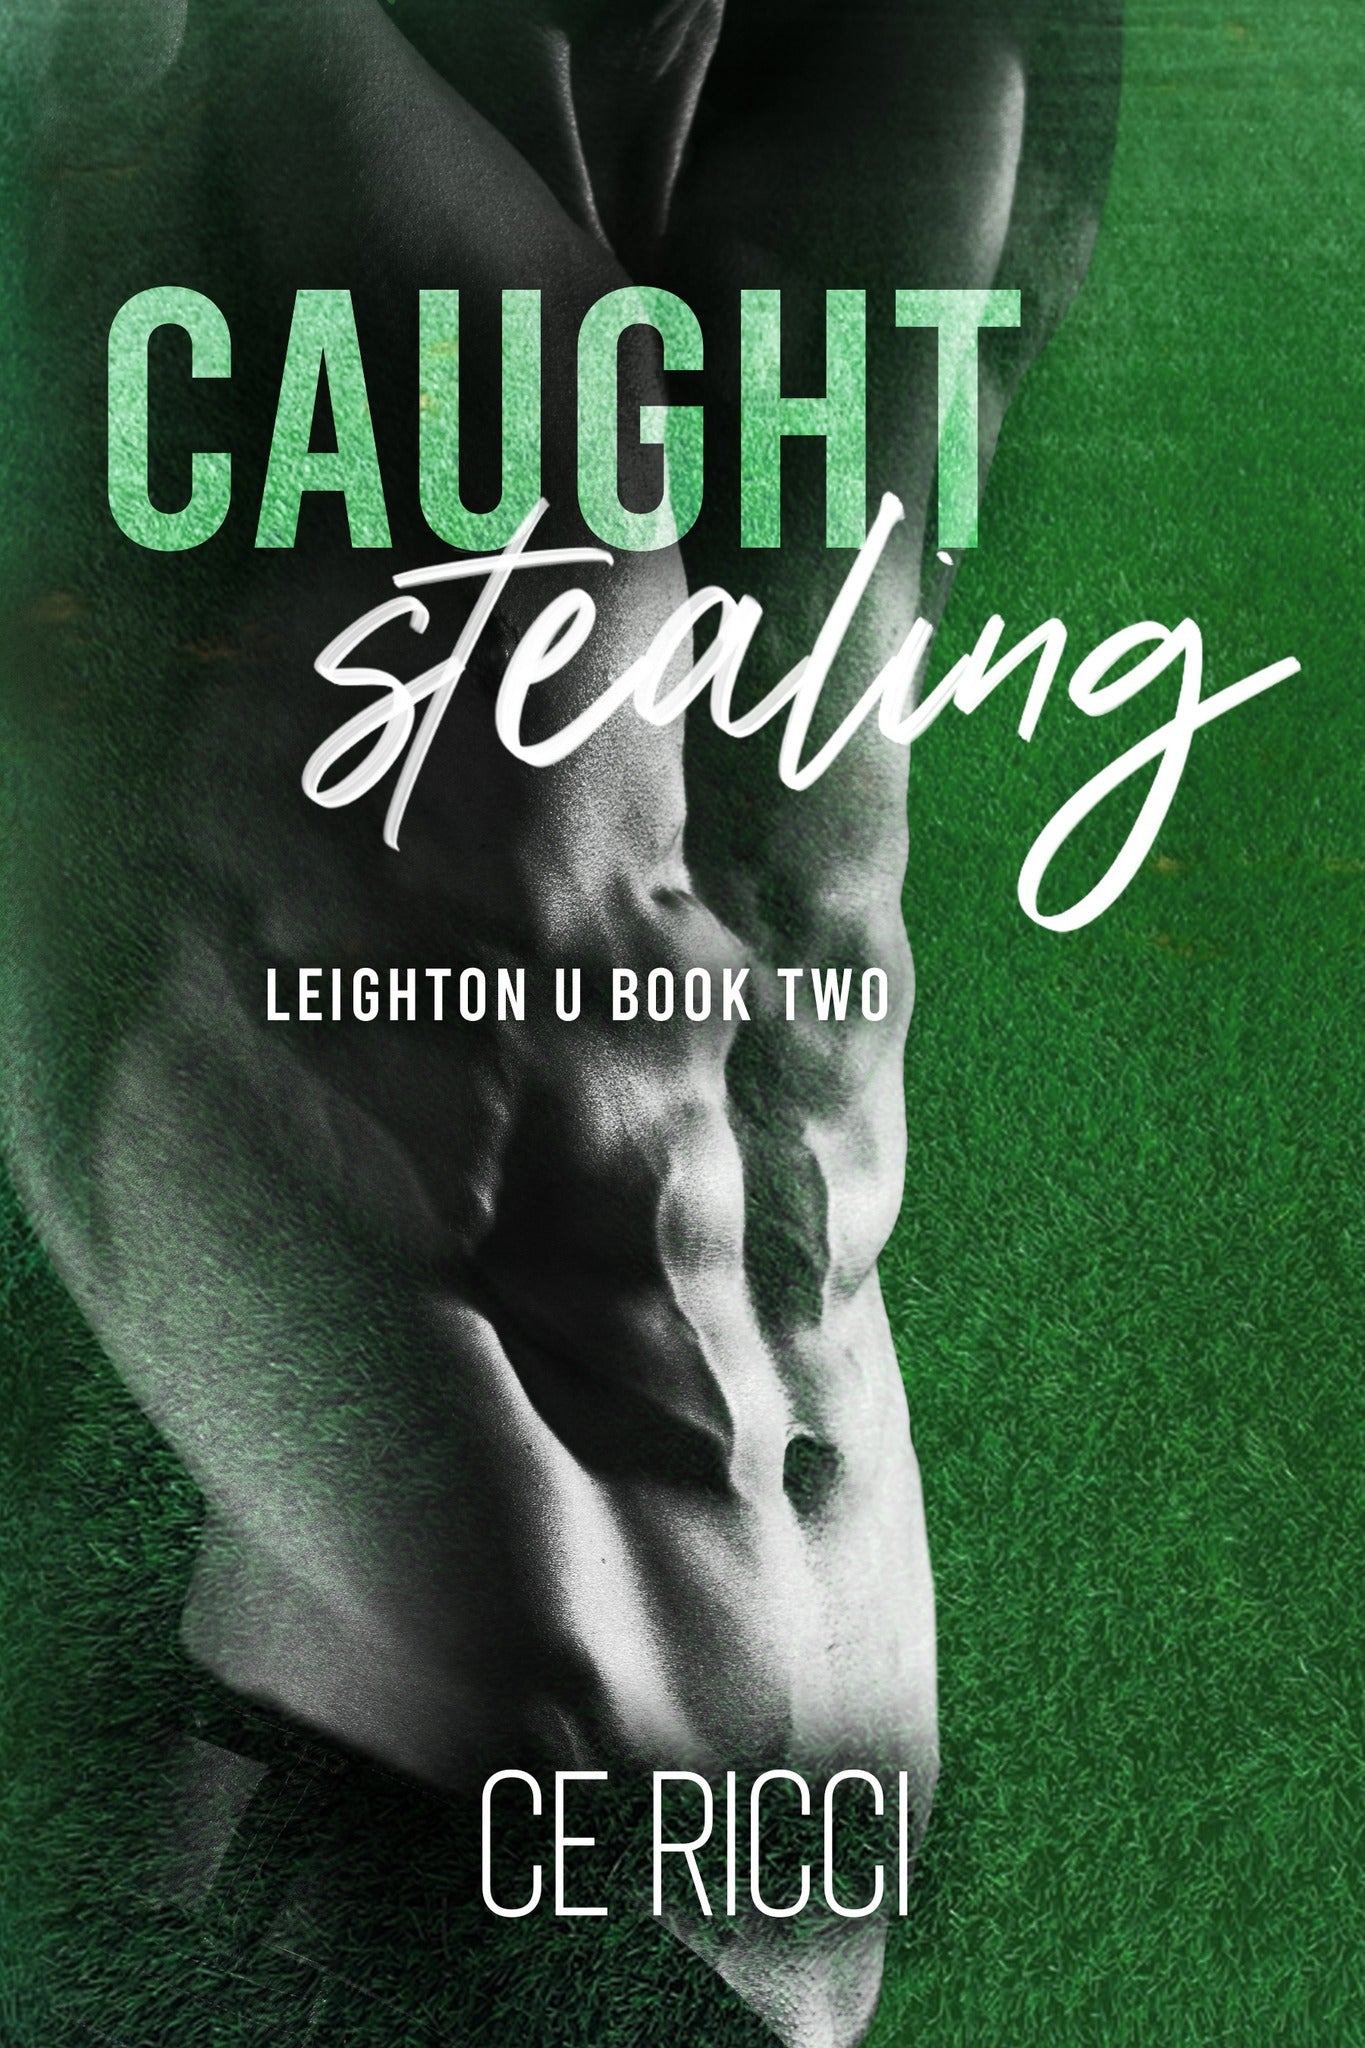 Caught Stealing - CE Ricci